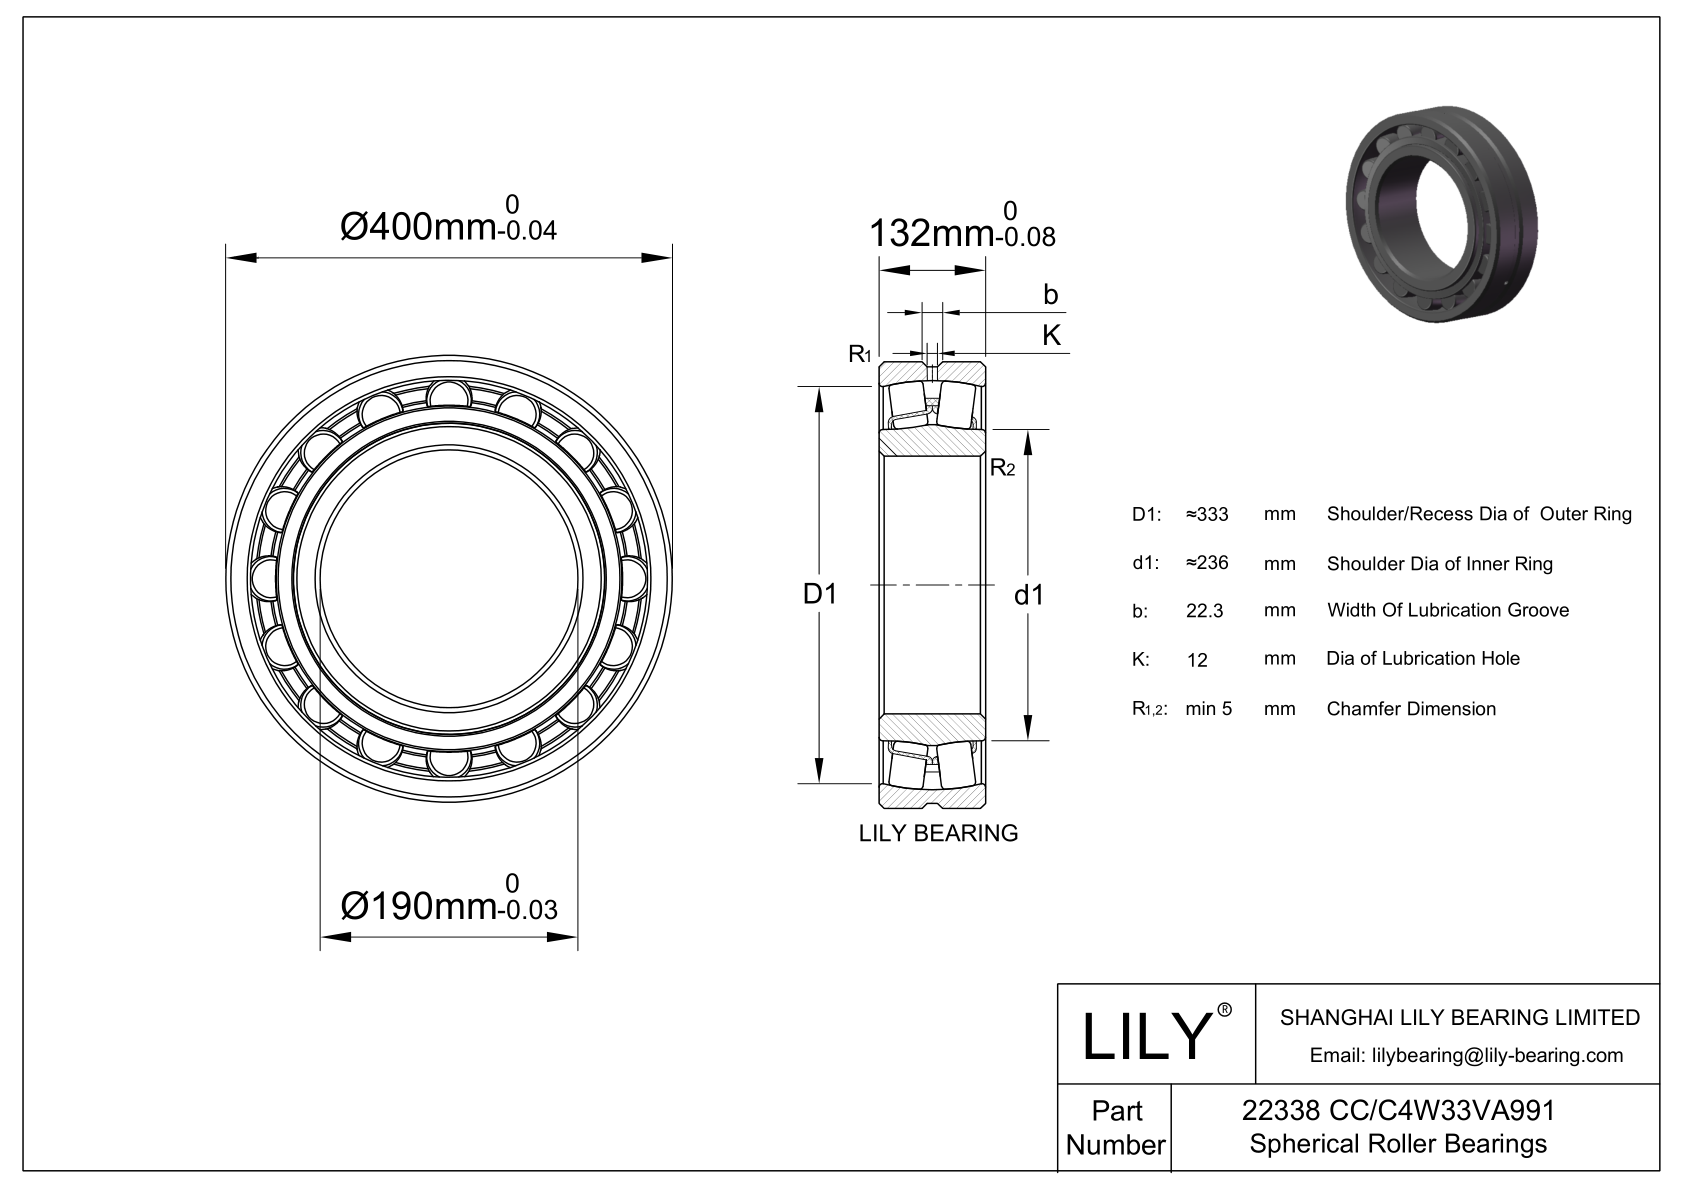 22338 CC/C4W33VA991 Double Row Spherical Roller Bearing cad drawing